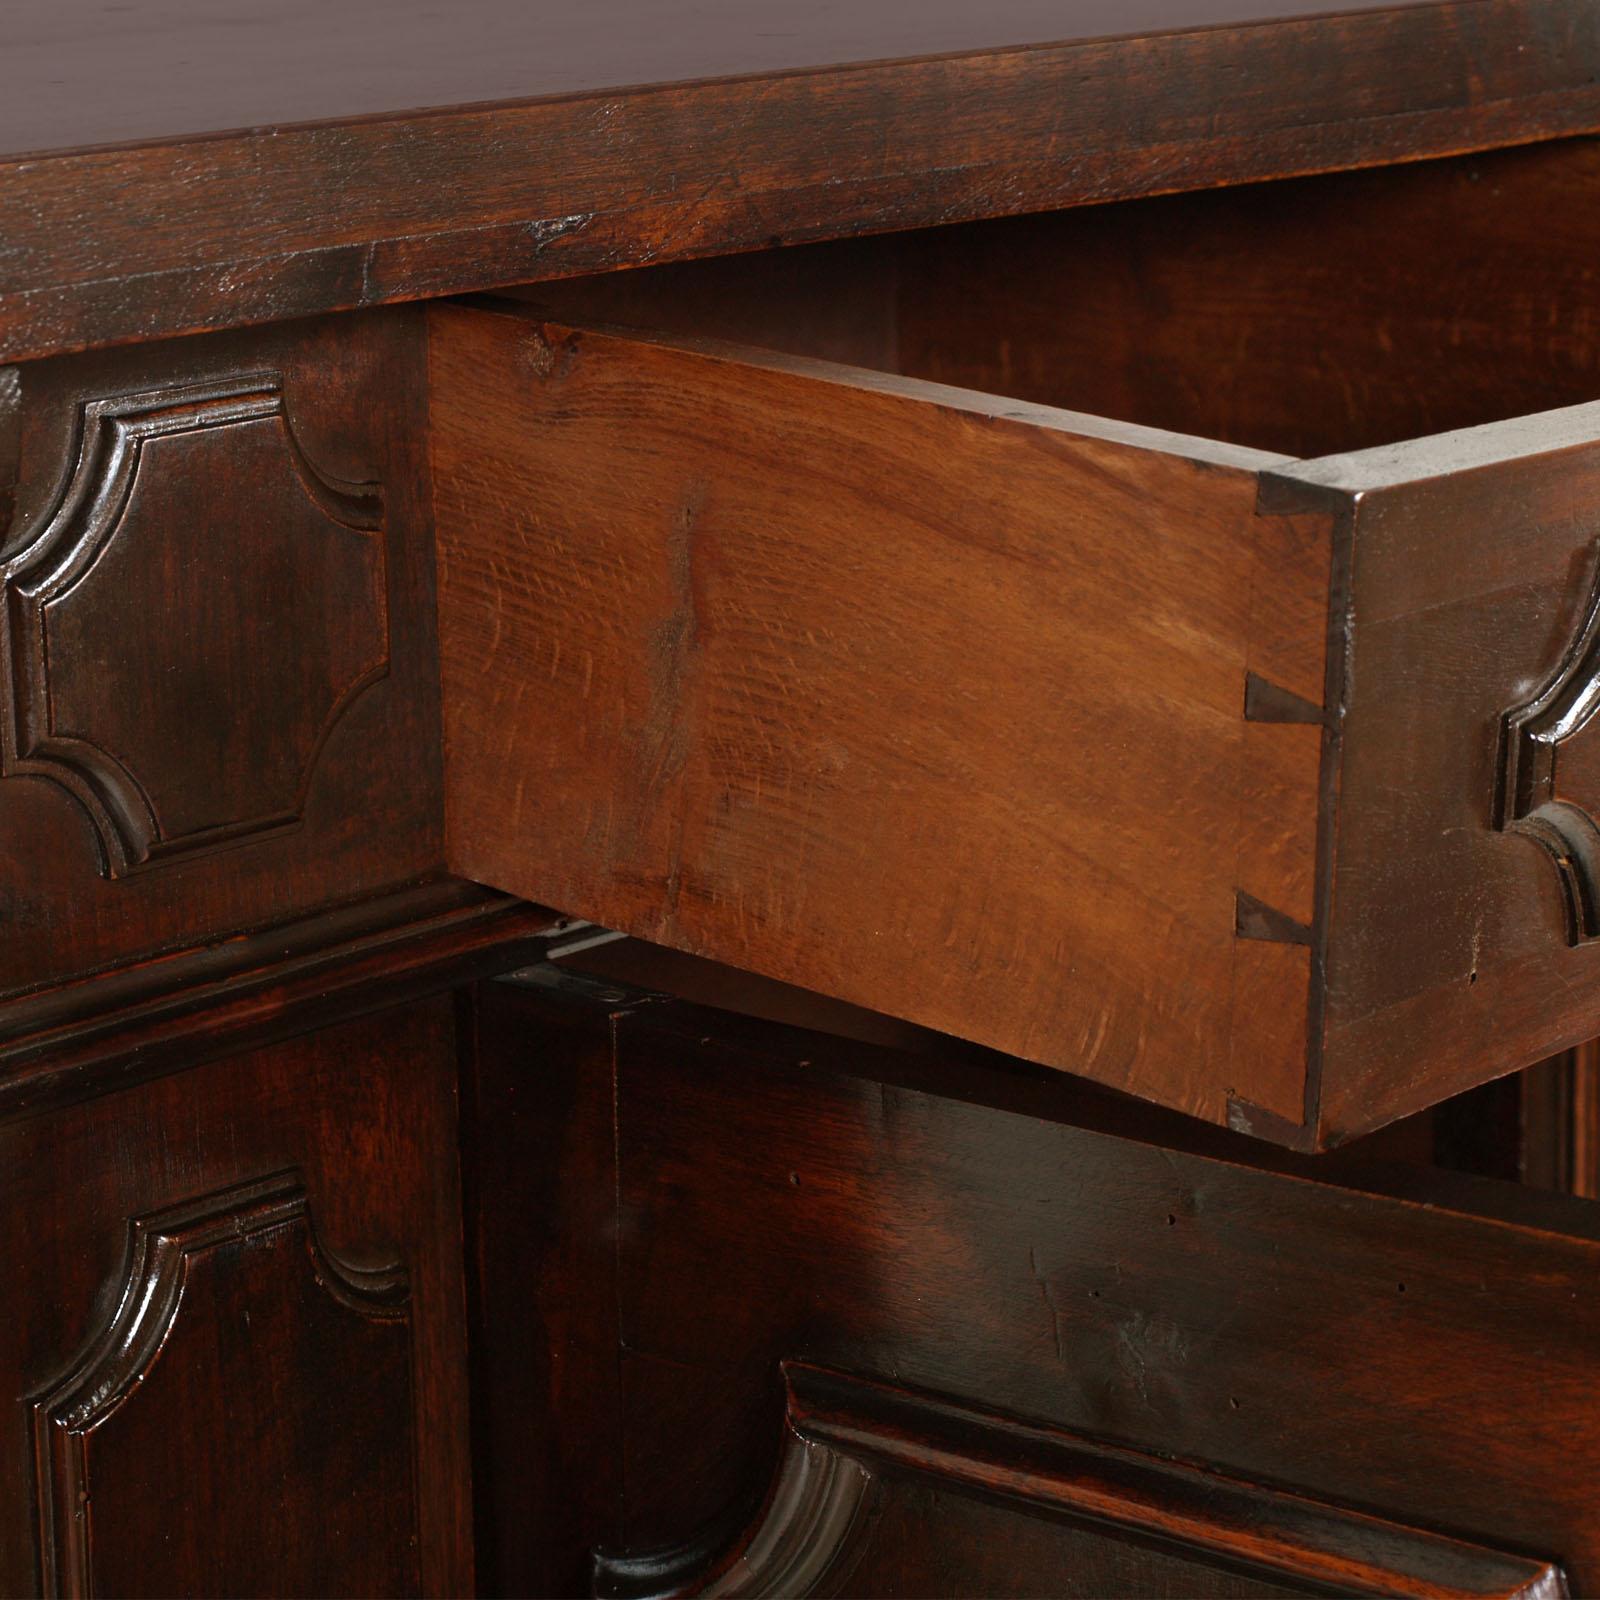 Renaissance Revival Tuscany Renaissance Credenza Sideboard by Dini & Puccini, 1928, in Solid Walnut For Sale